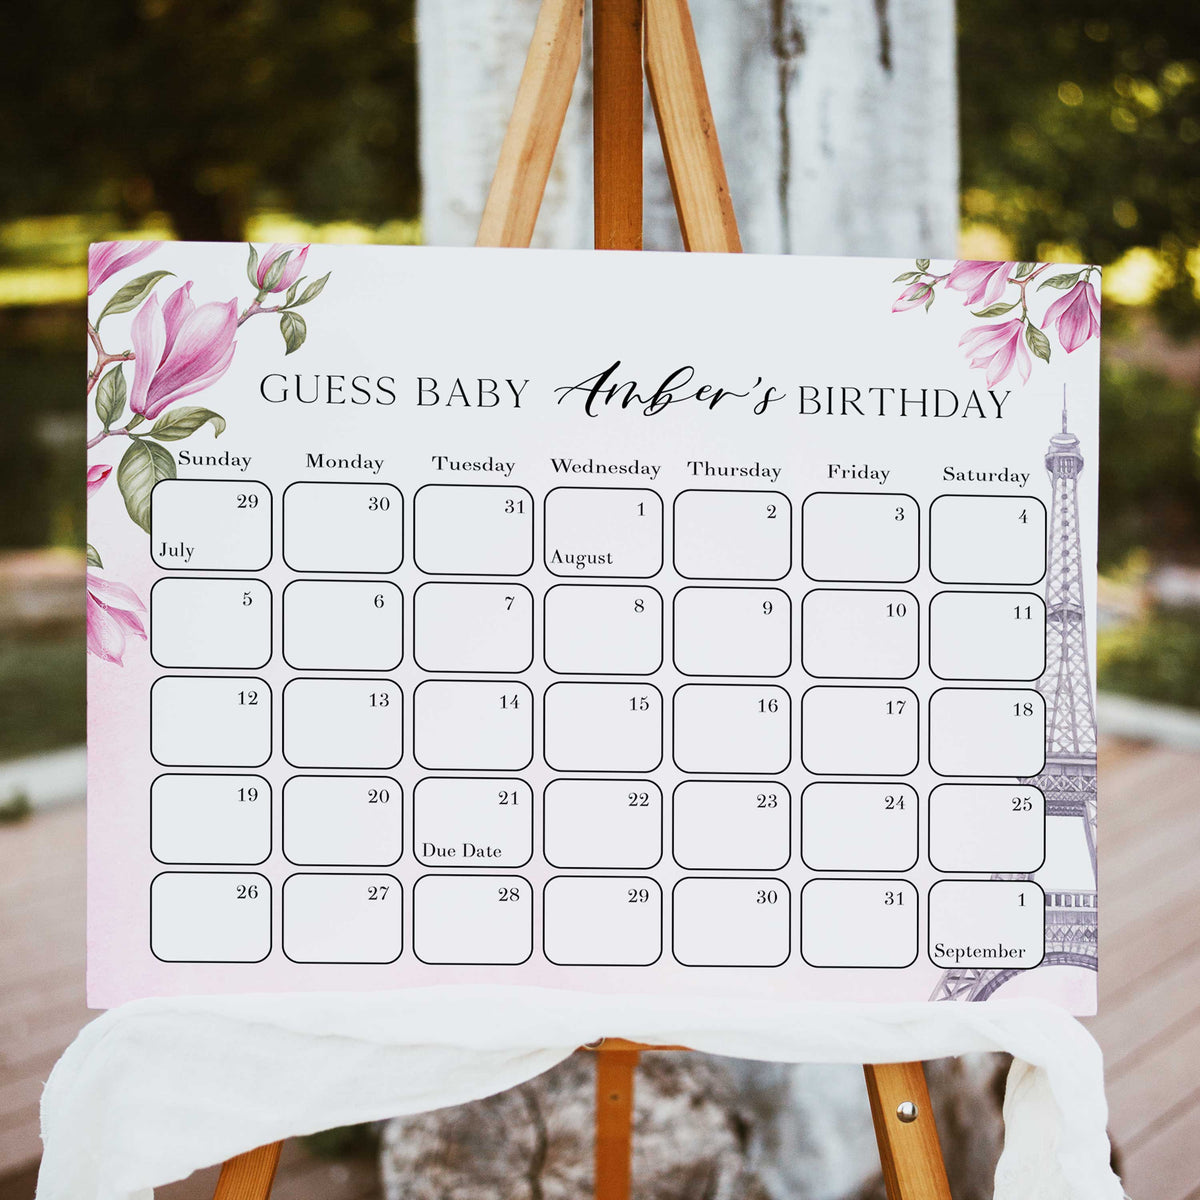 guess the baby birthday game,  Paris baby shower games, printable baby shower games, Parisian baby shower games, fun baby shower games